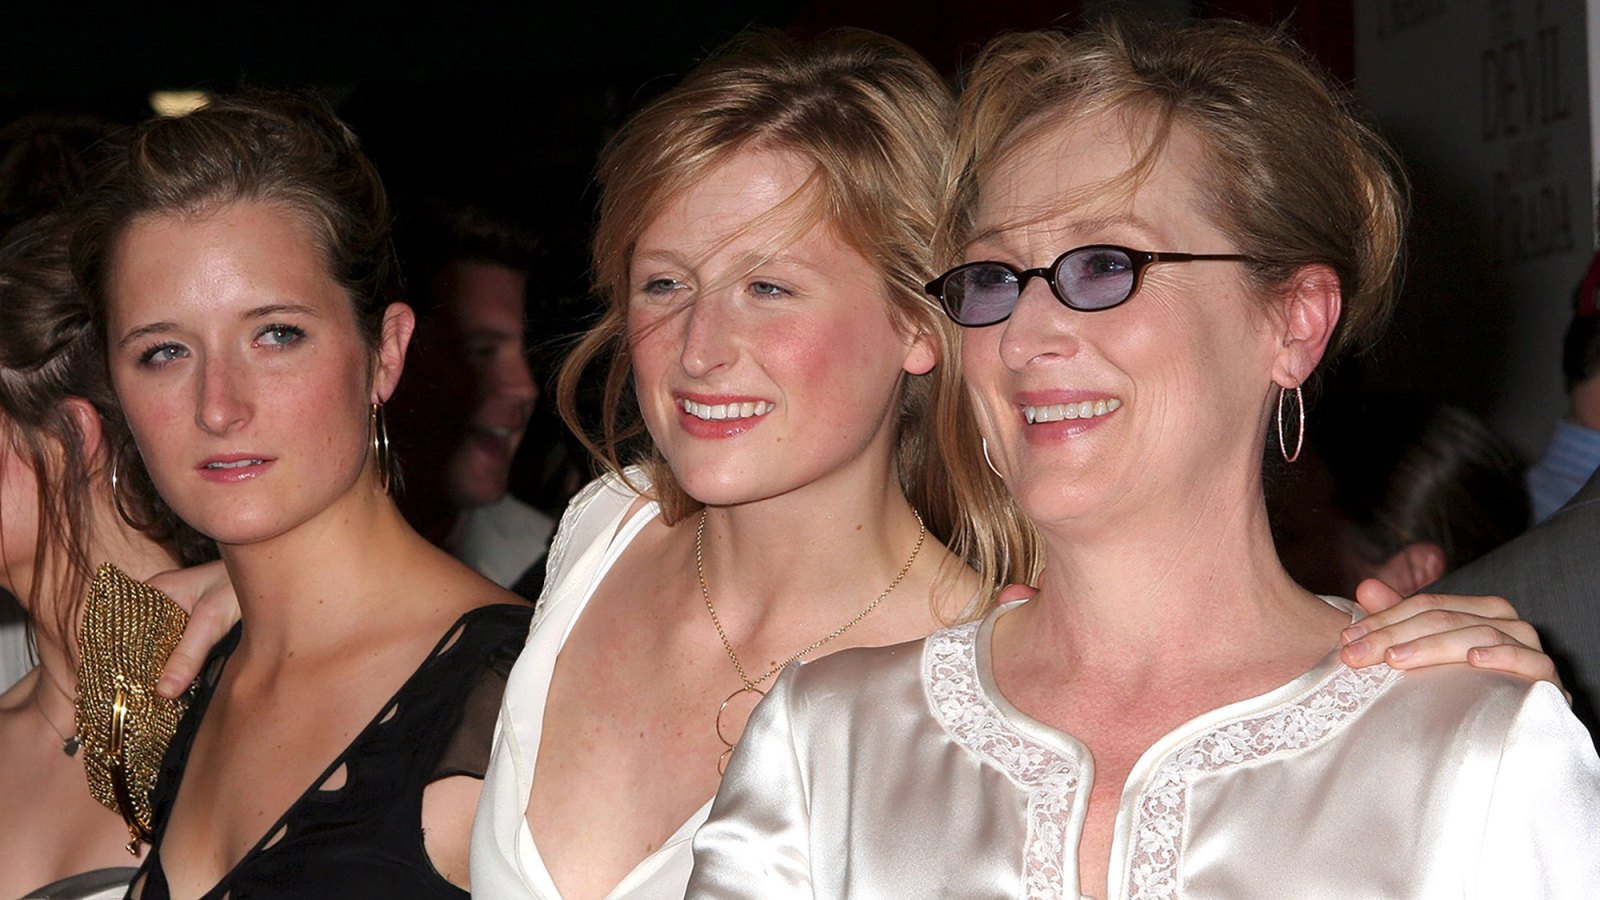 Mamie Grace Gummer Look Just Like Mom Meryl Streep At A Young Age